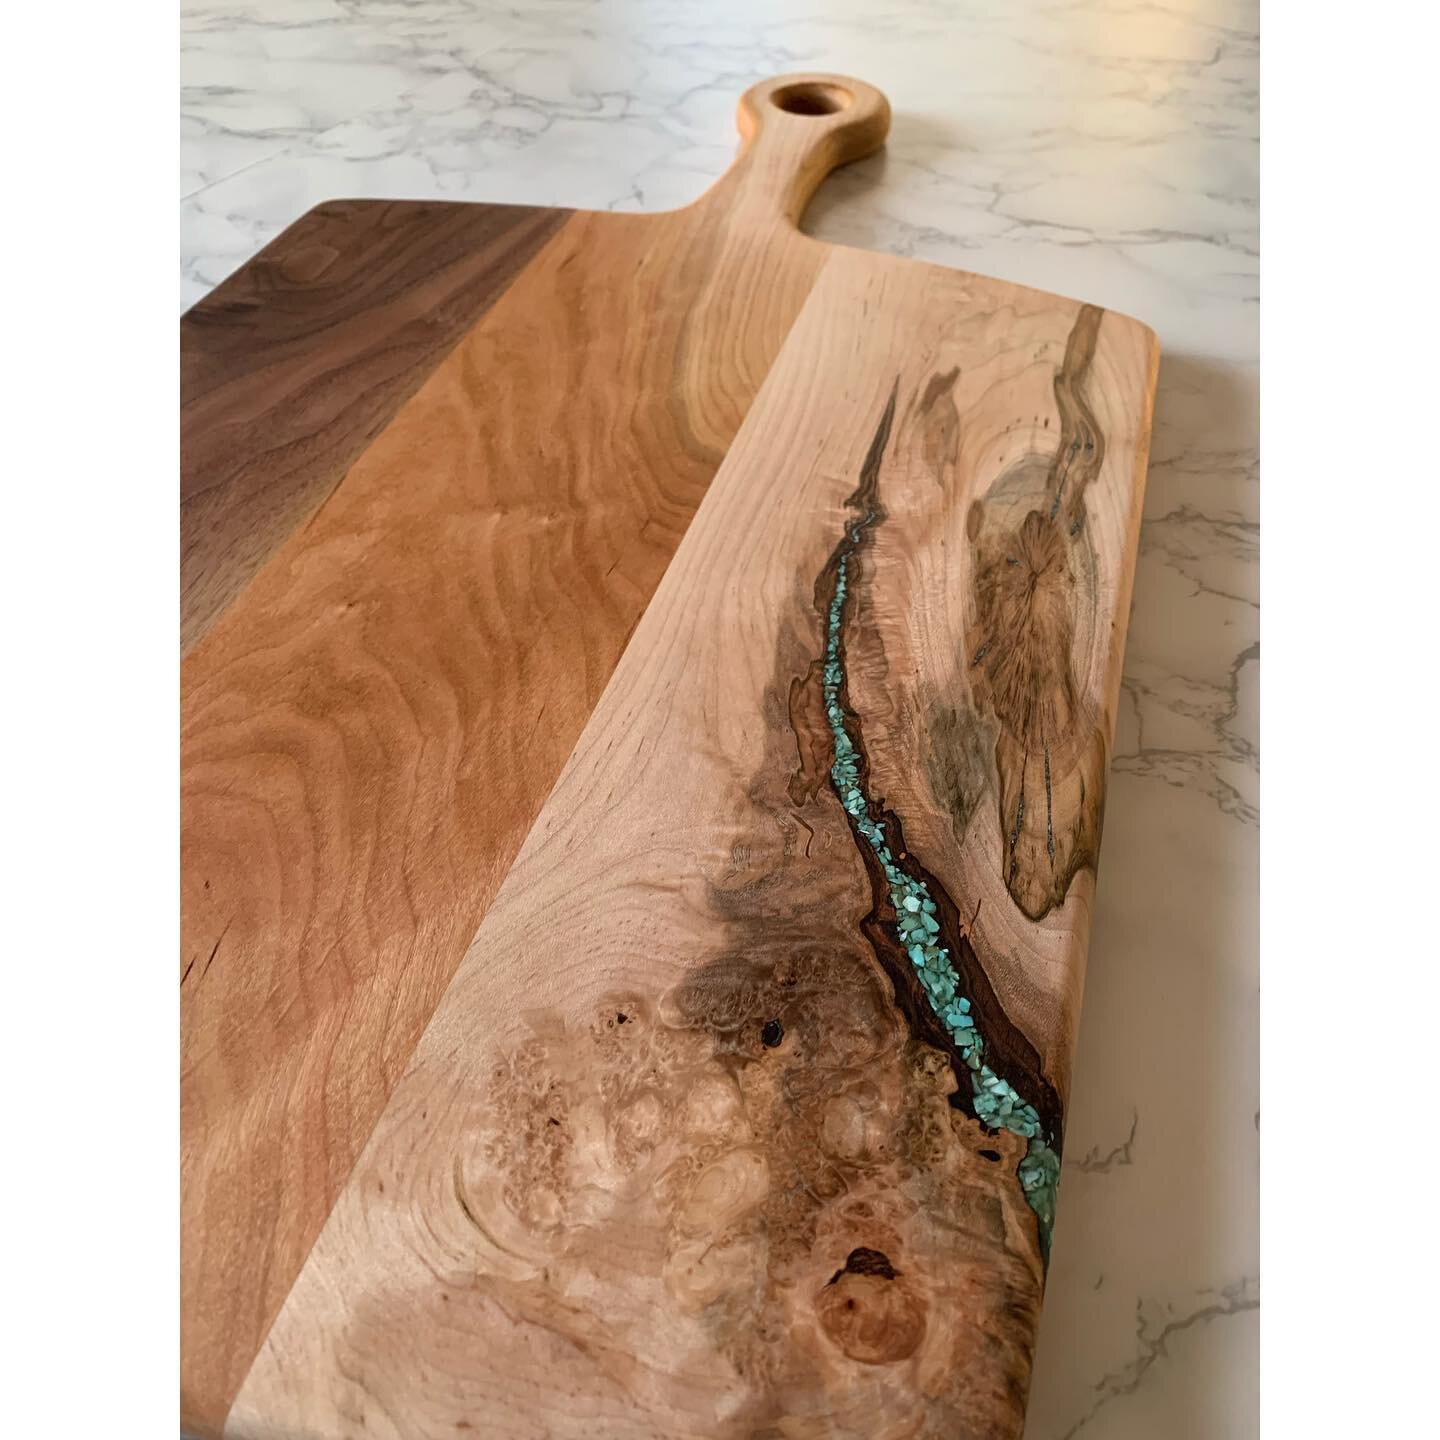 Our favorite types of woods with our favorite inlaid perfect imperfections. 

Ambrosia Maple-Cherry-Walnut -Cerrillos Turquoise 

#tetradesignworks #woodworking #cuttingboard #servingboard #cheeseboard #handcrafted #handmade  #homegoods #albuquerque 